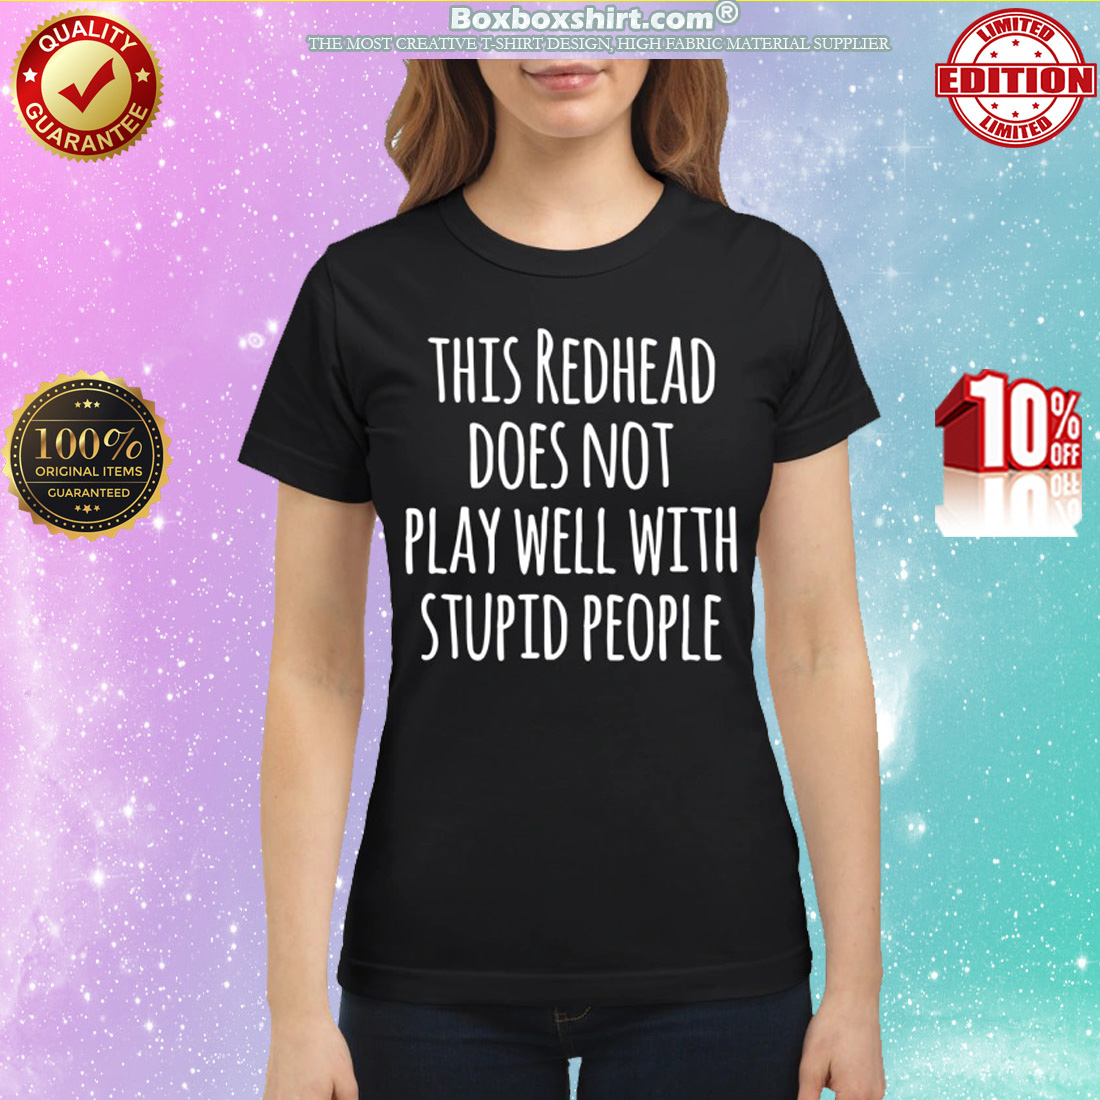 This redhead does not play well with stupid people classic shirt